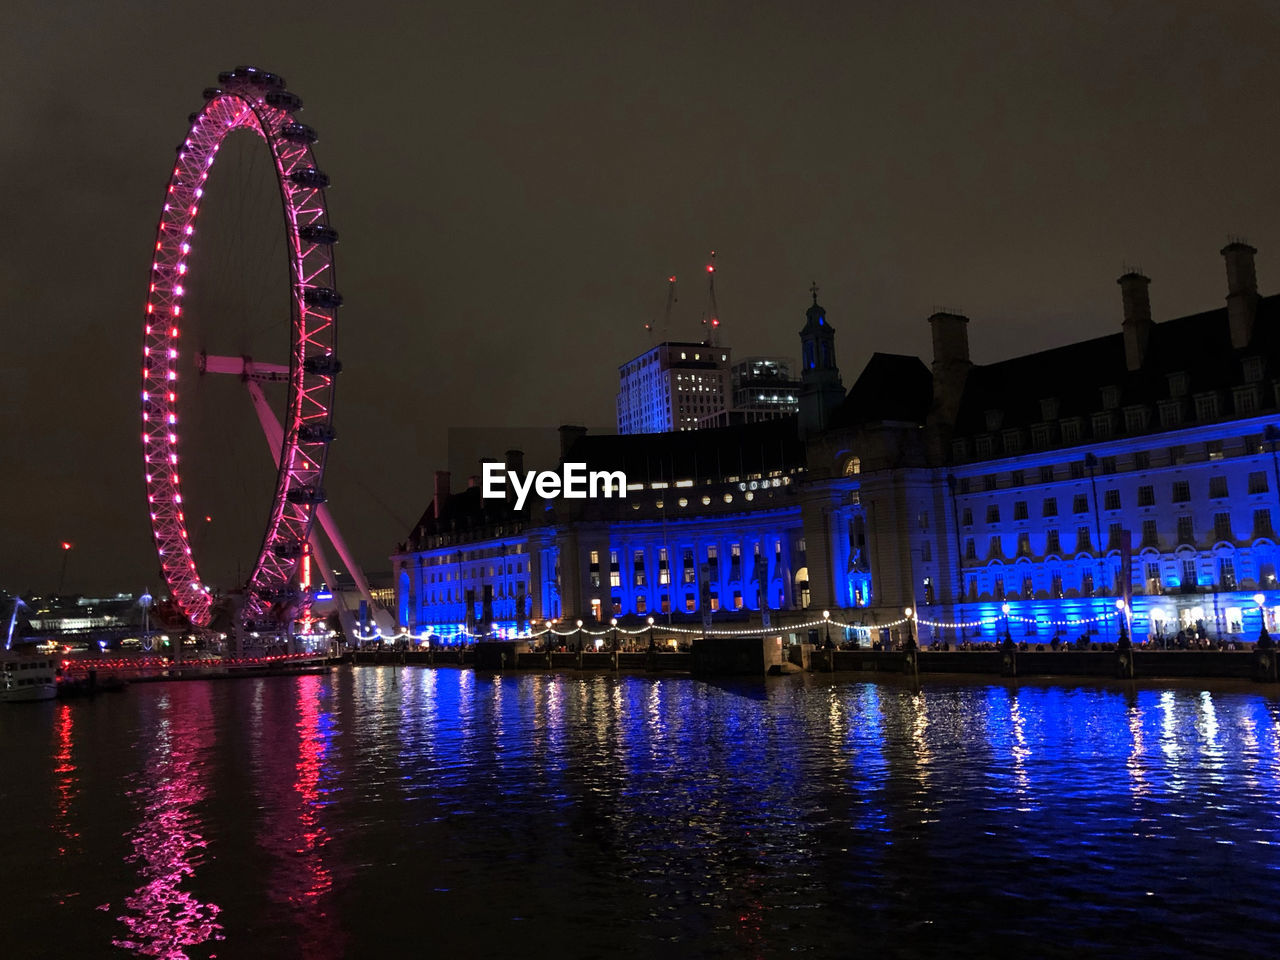 London eye by night lightening in pink and blue